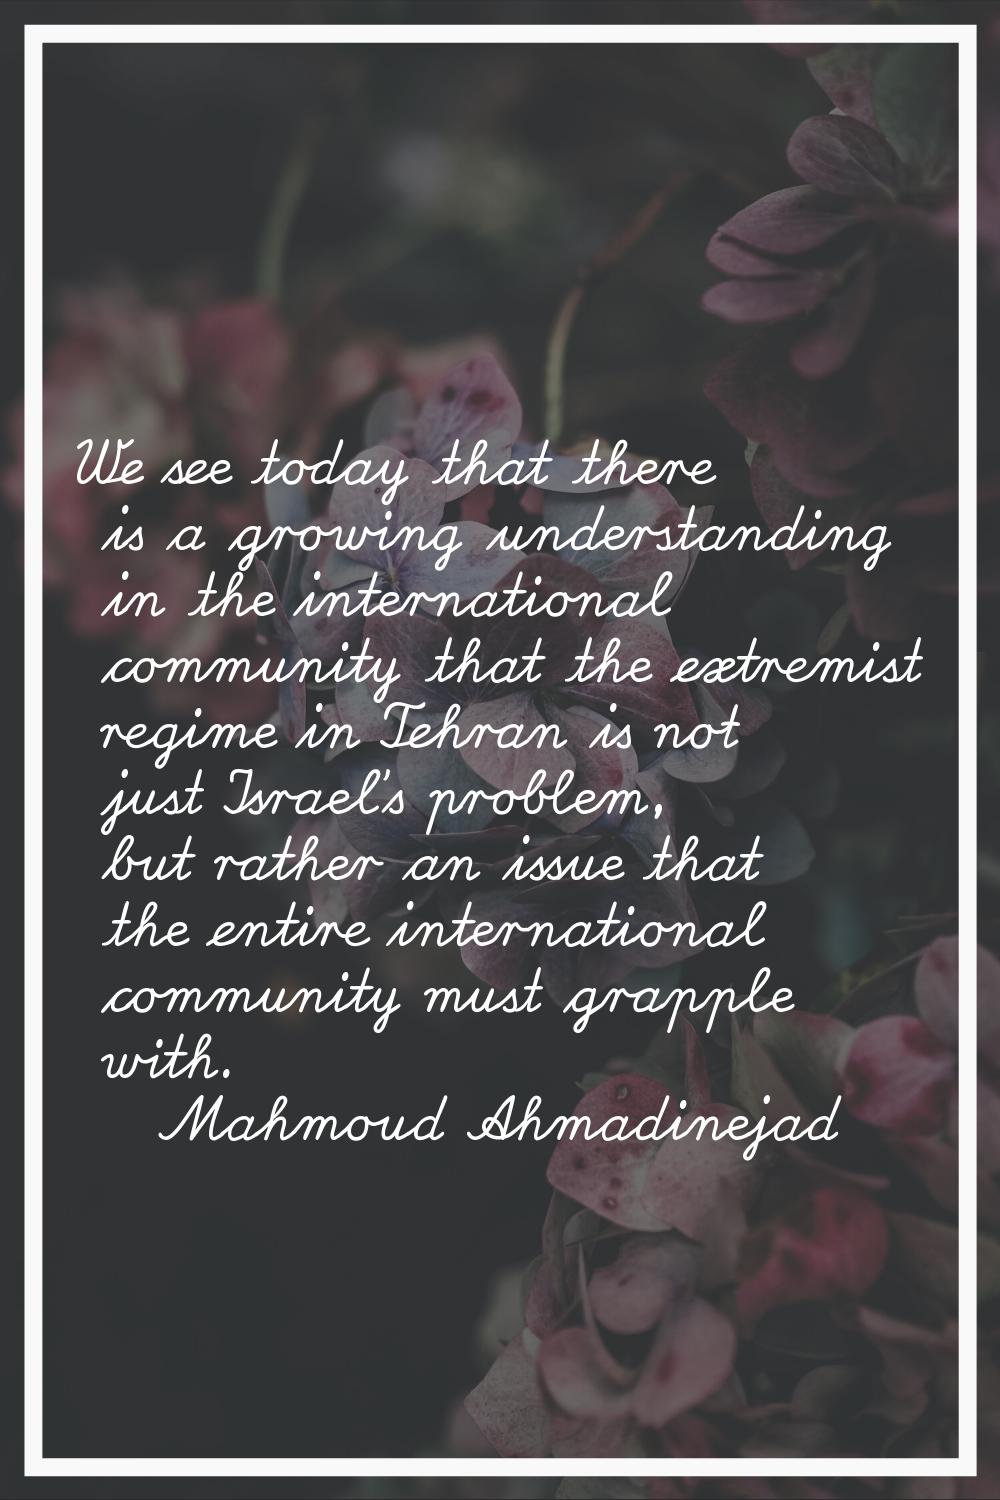 We see today that there is a growing understanding in the international community that the extremis